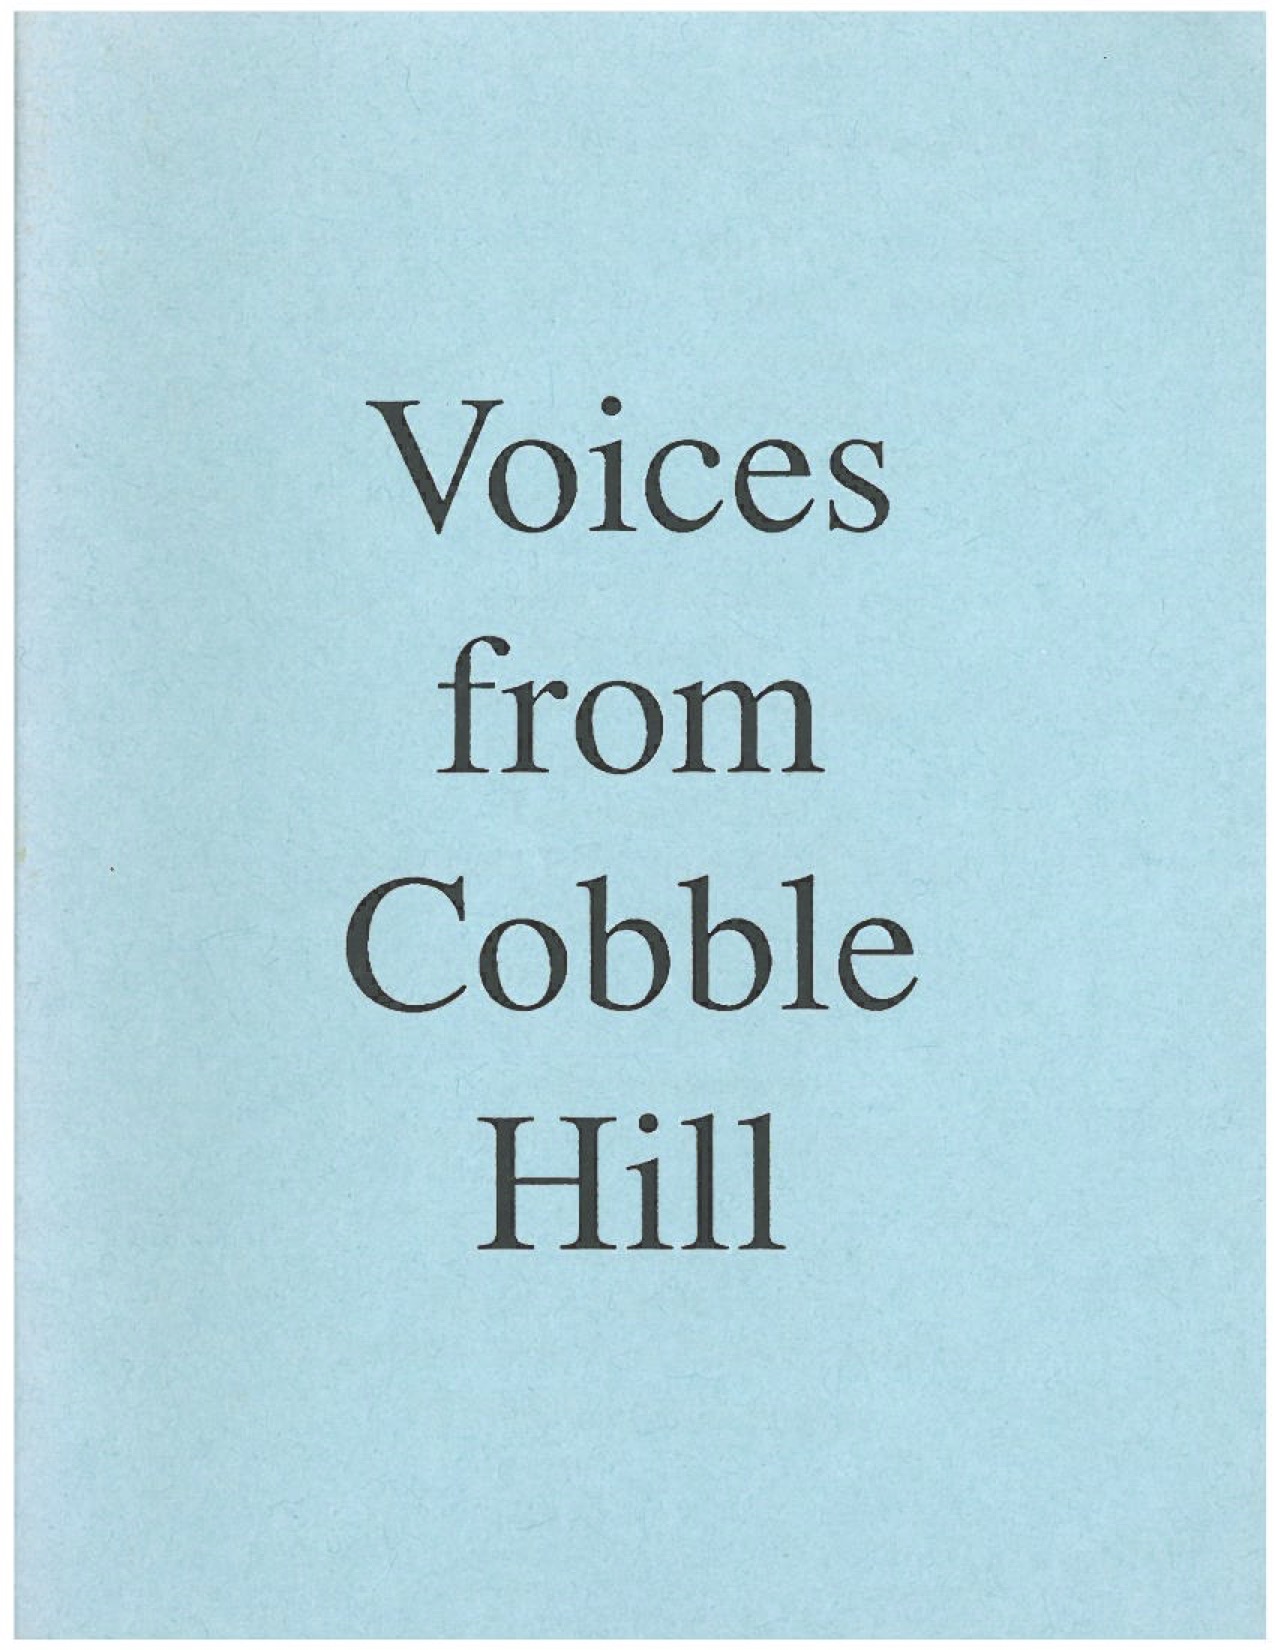 Voices from Cobble Hill